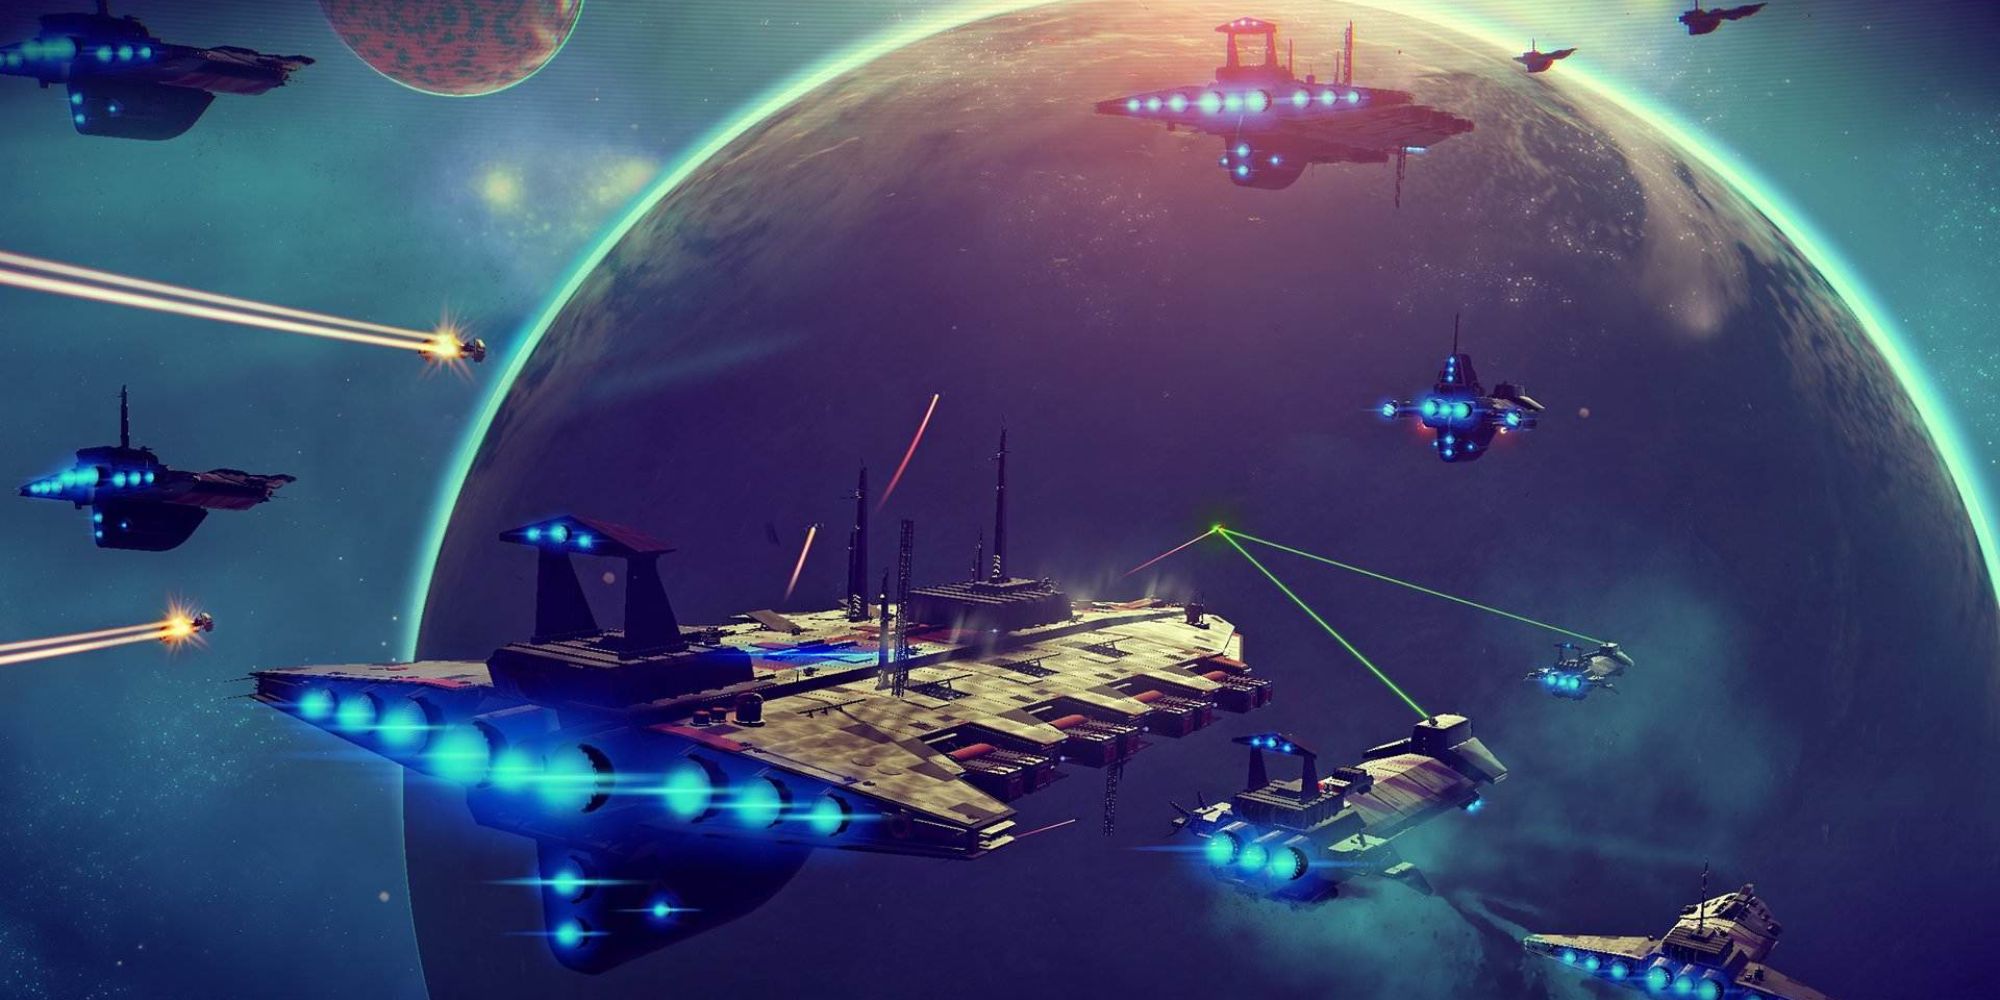 No Man's Sky wide angle screenshot of multiple freighters fighting in space near planet